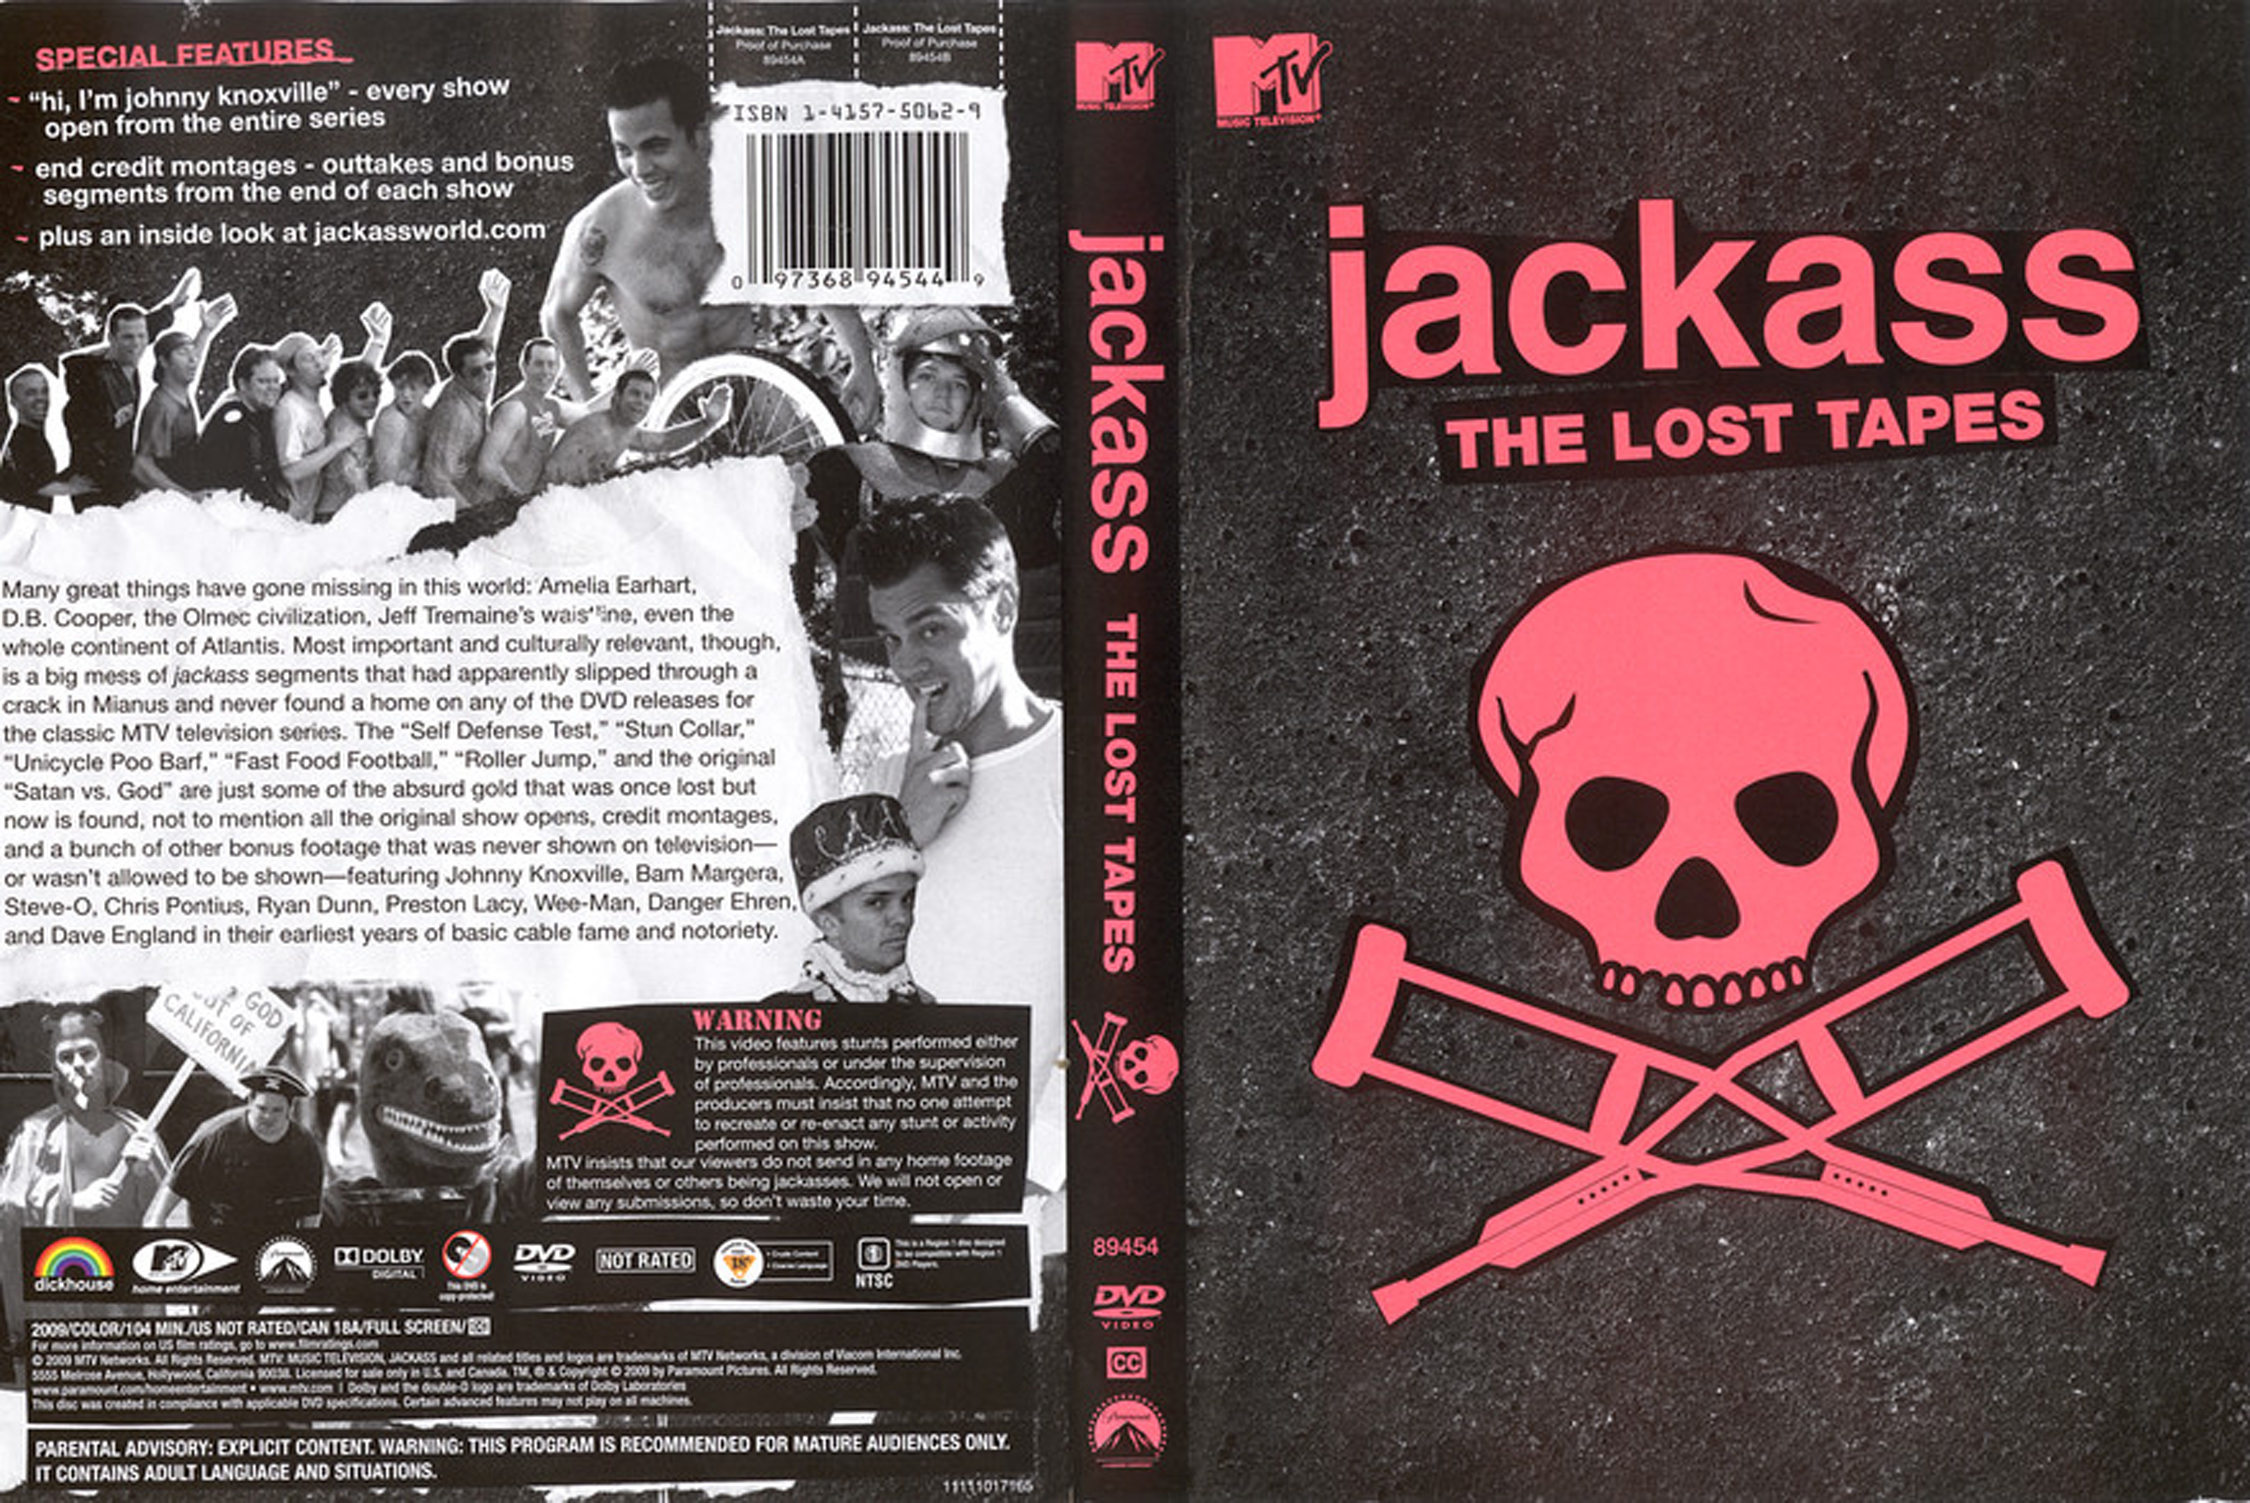 Jaquette DVD Jackass The Lost Tapes Zone 1